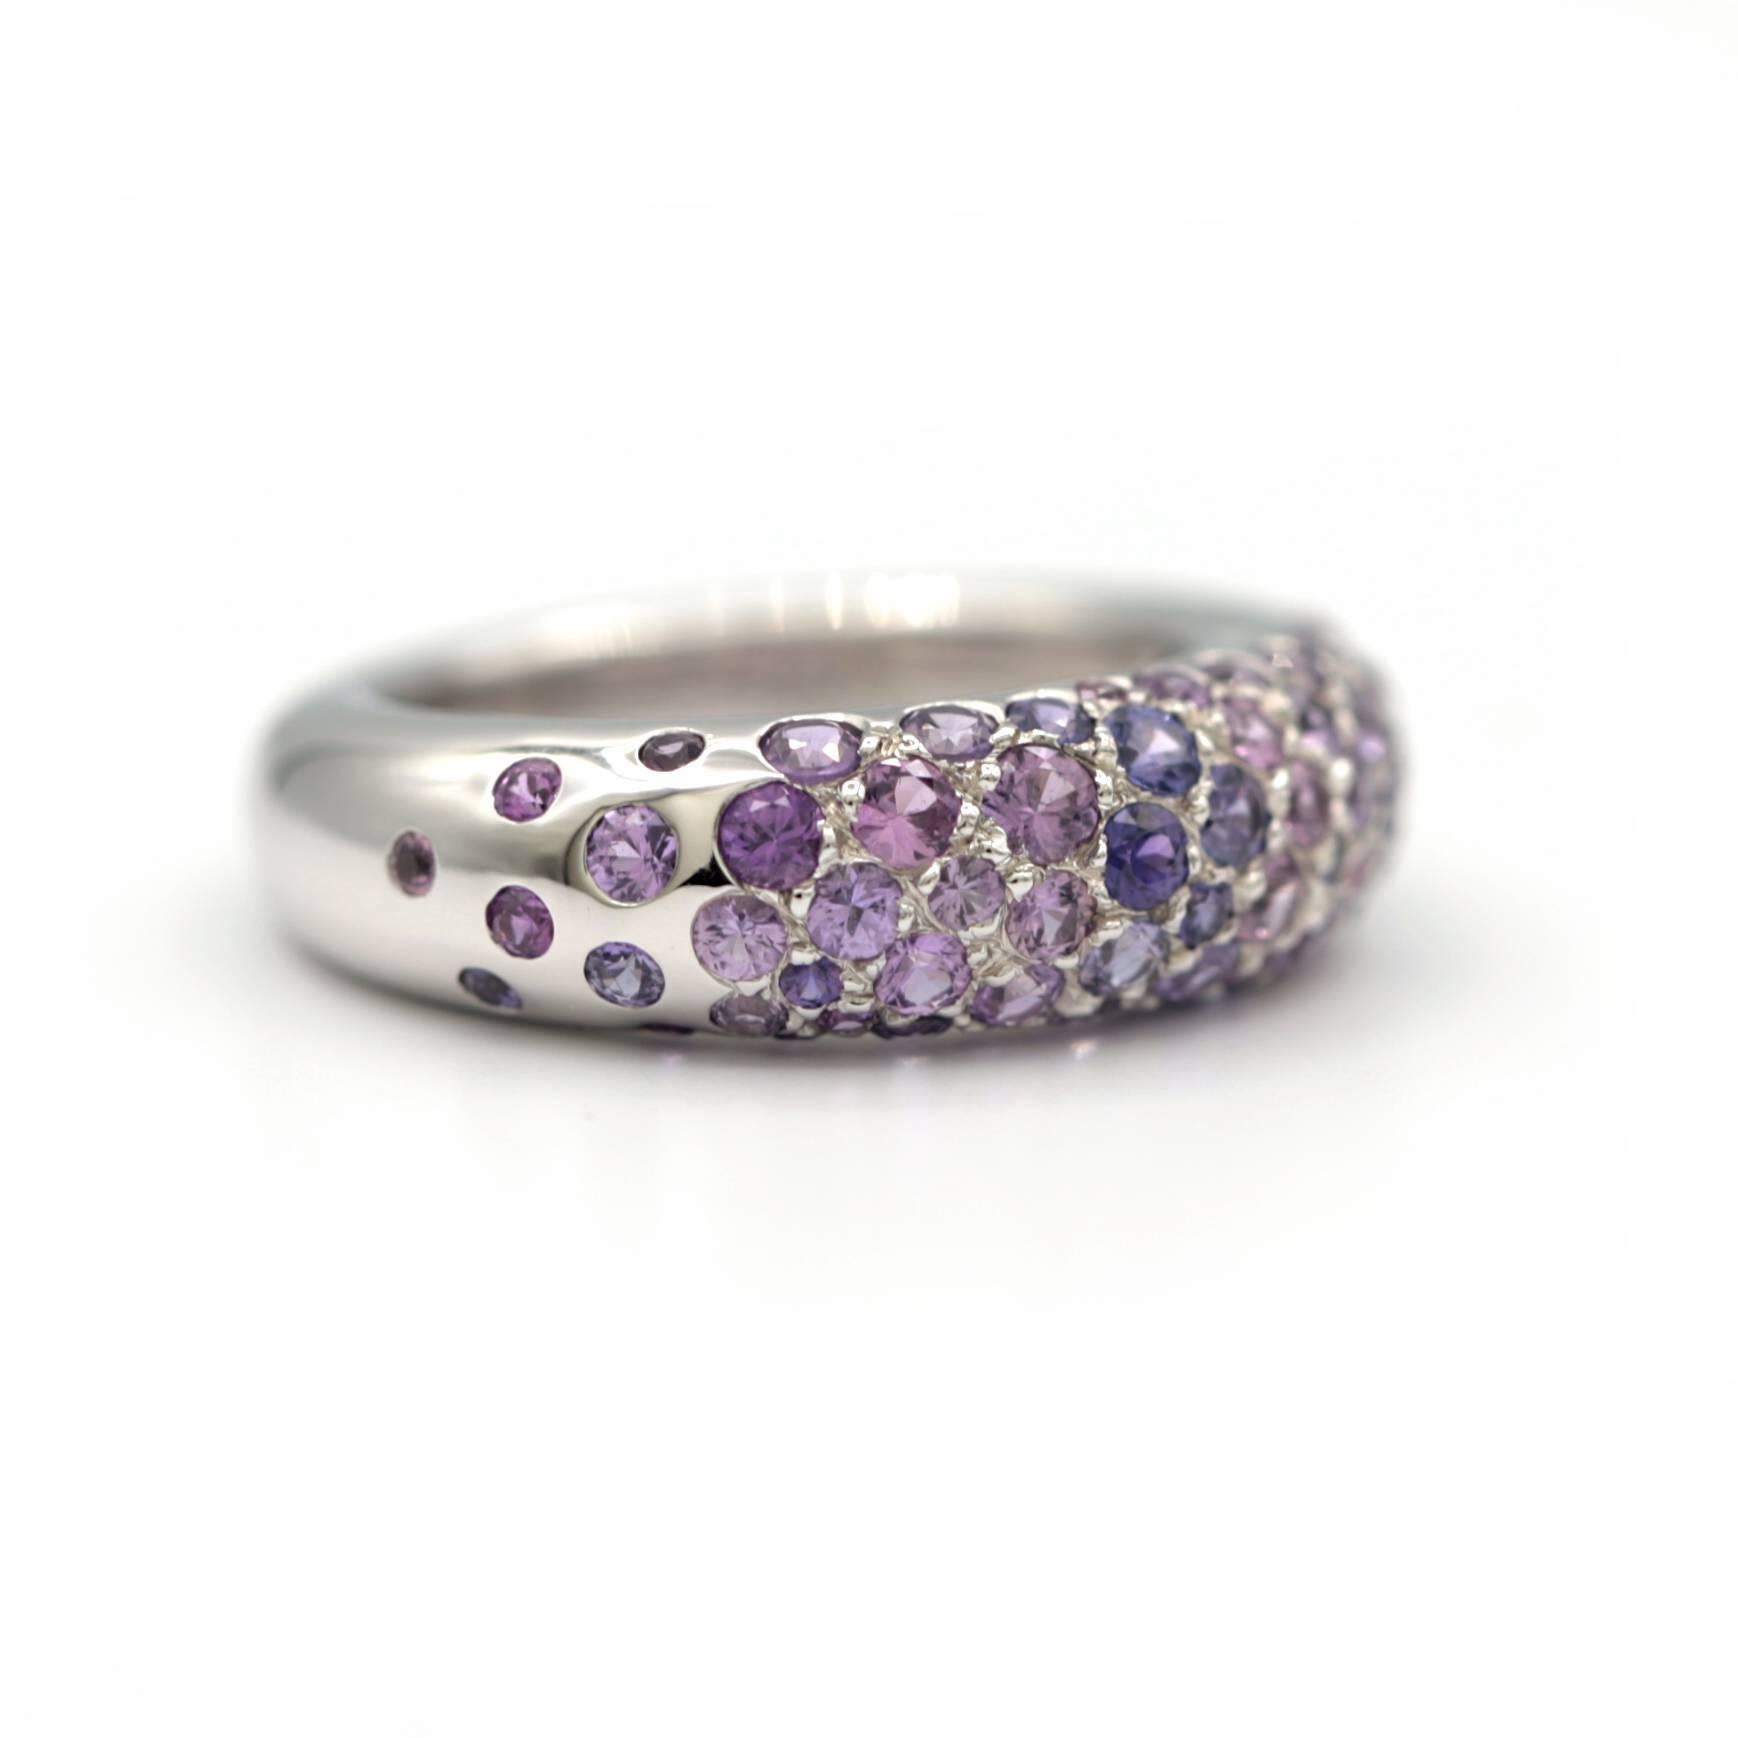 From the Chaumet Collection, this ring has gorgeous blue and purple Sapphires weighting approximately 2.00ct.
Its an elegant piece to add a pop of color to your jewelry collection.
It is made with 18k white gold and is a size 6.
